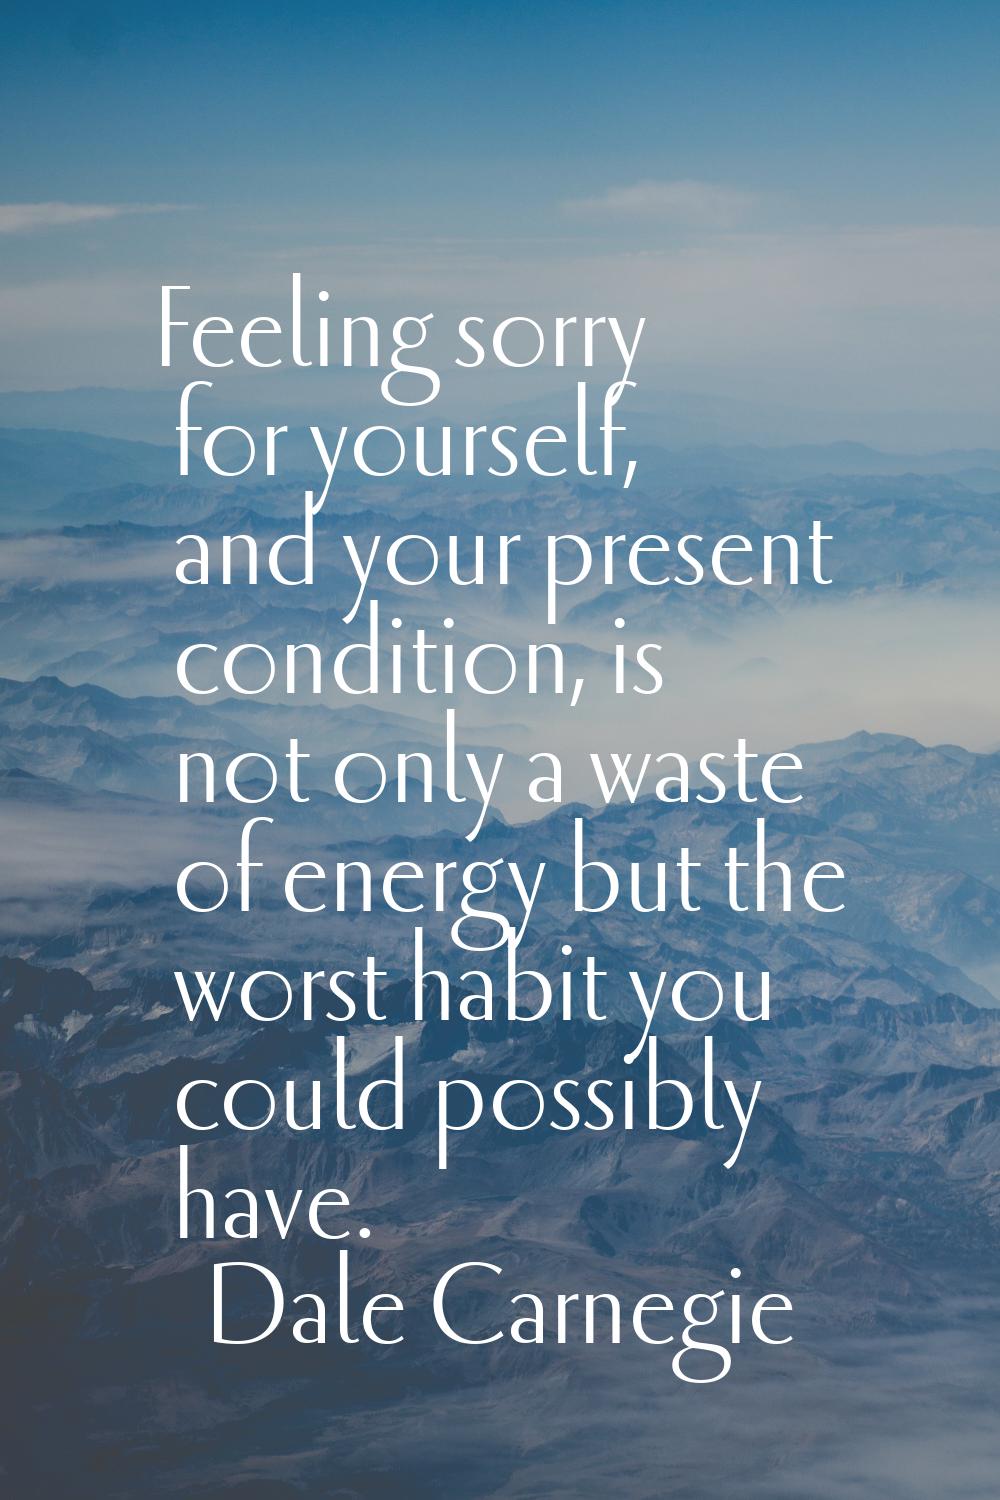 Feeling sorry for yourself, and your present condition, is not only a waste of energy but the worst